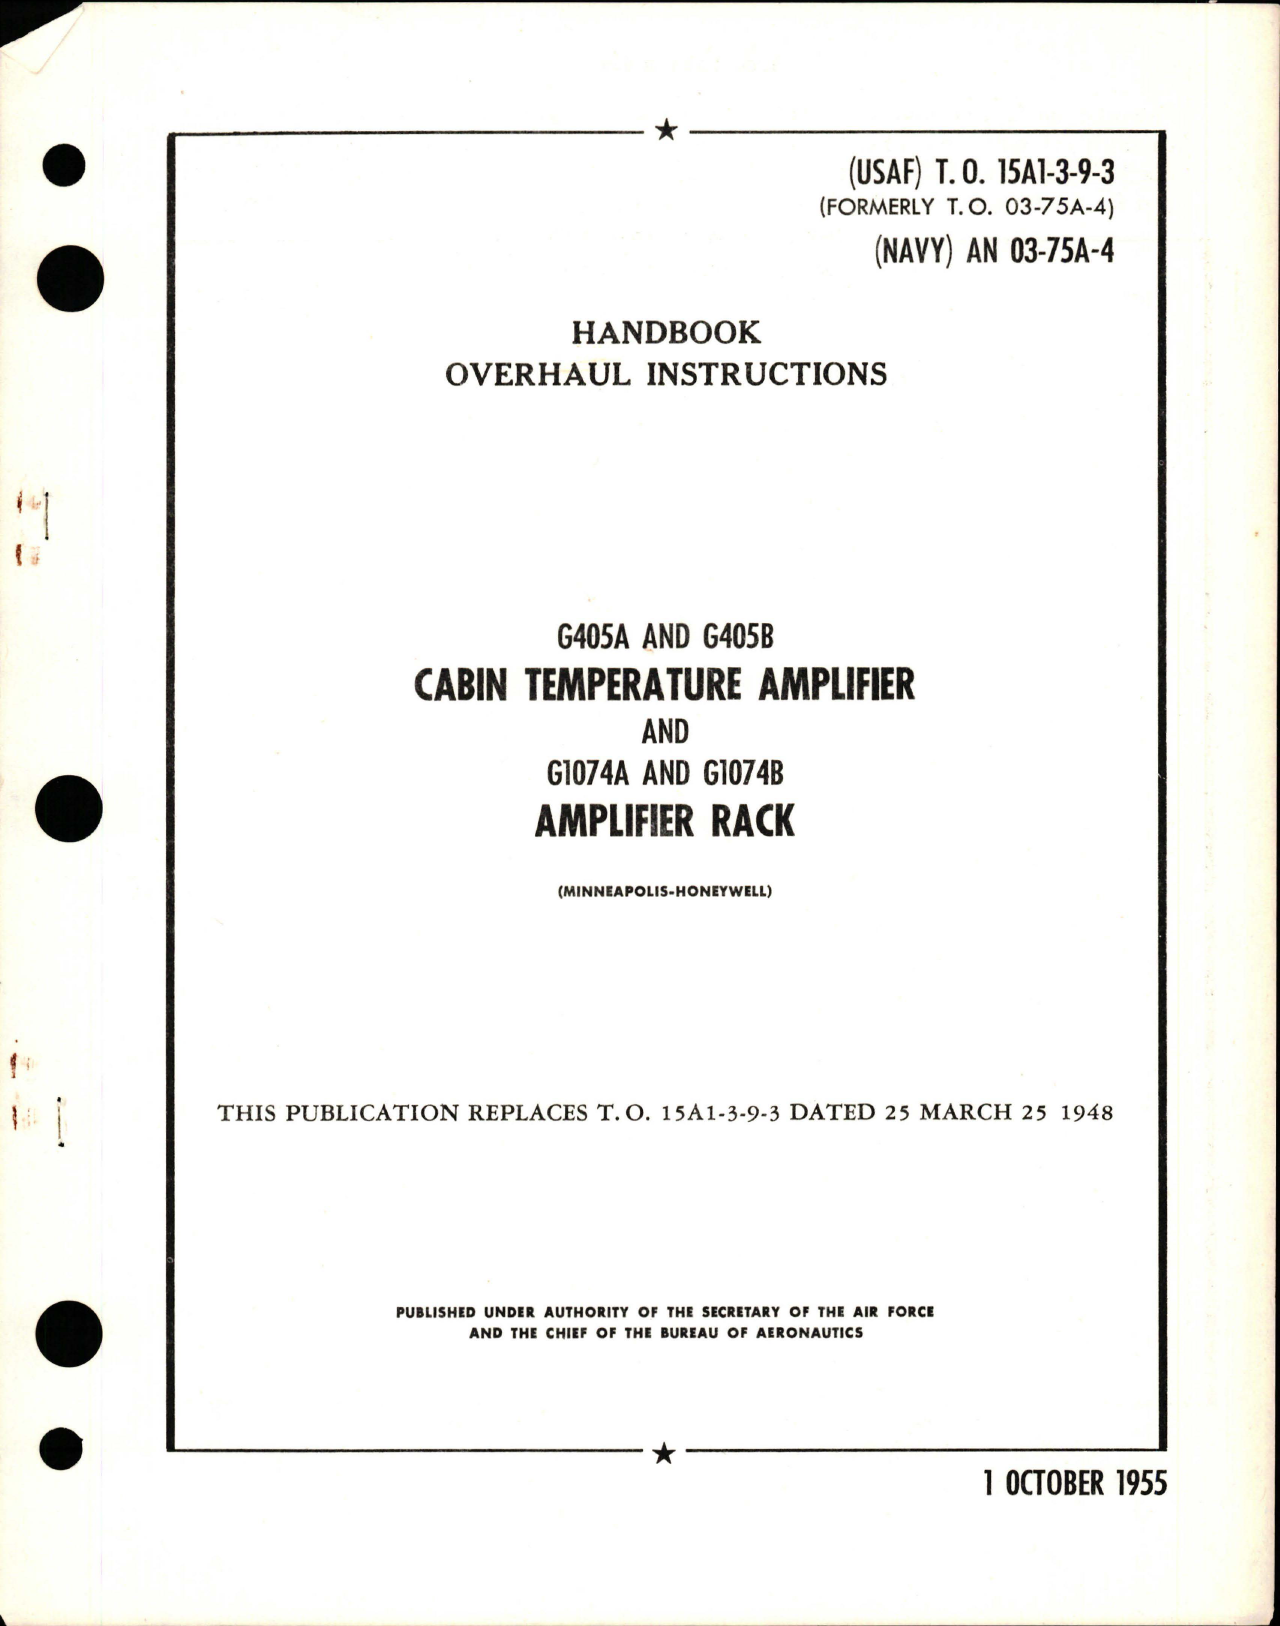 Sample page 1 from AirCorps Library document: Overhaul Instructions for Cabin Temperature Amplifier and Amplifier Rack - G405A, G405B, G1074A, and G1074B